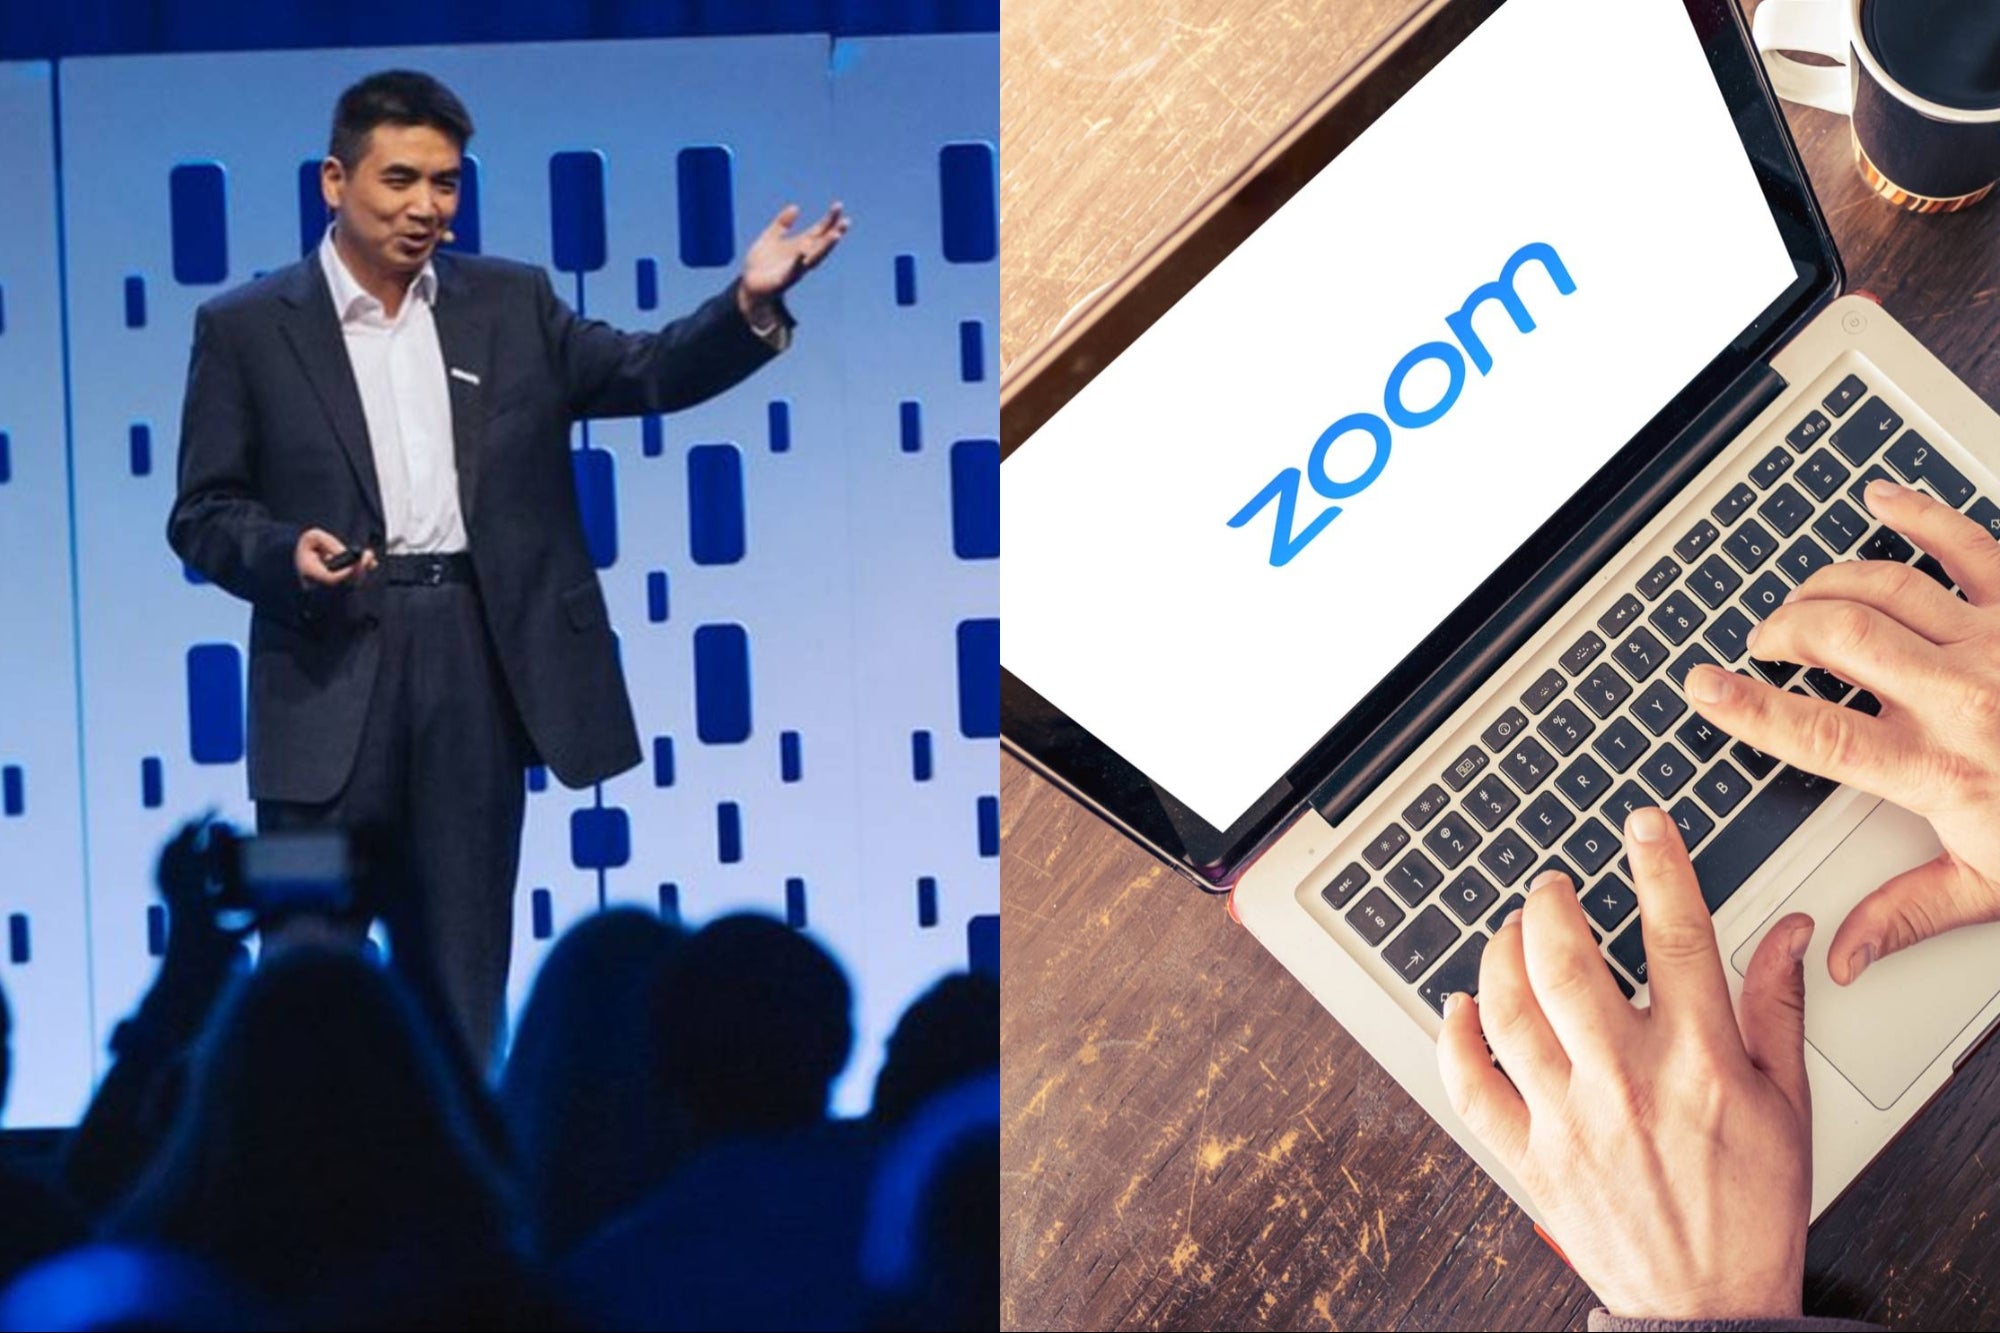 Zoom's CEO Just Gave Away $6 Billion Worth of His Shares